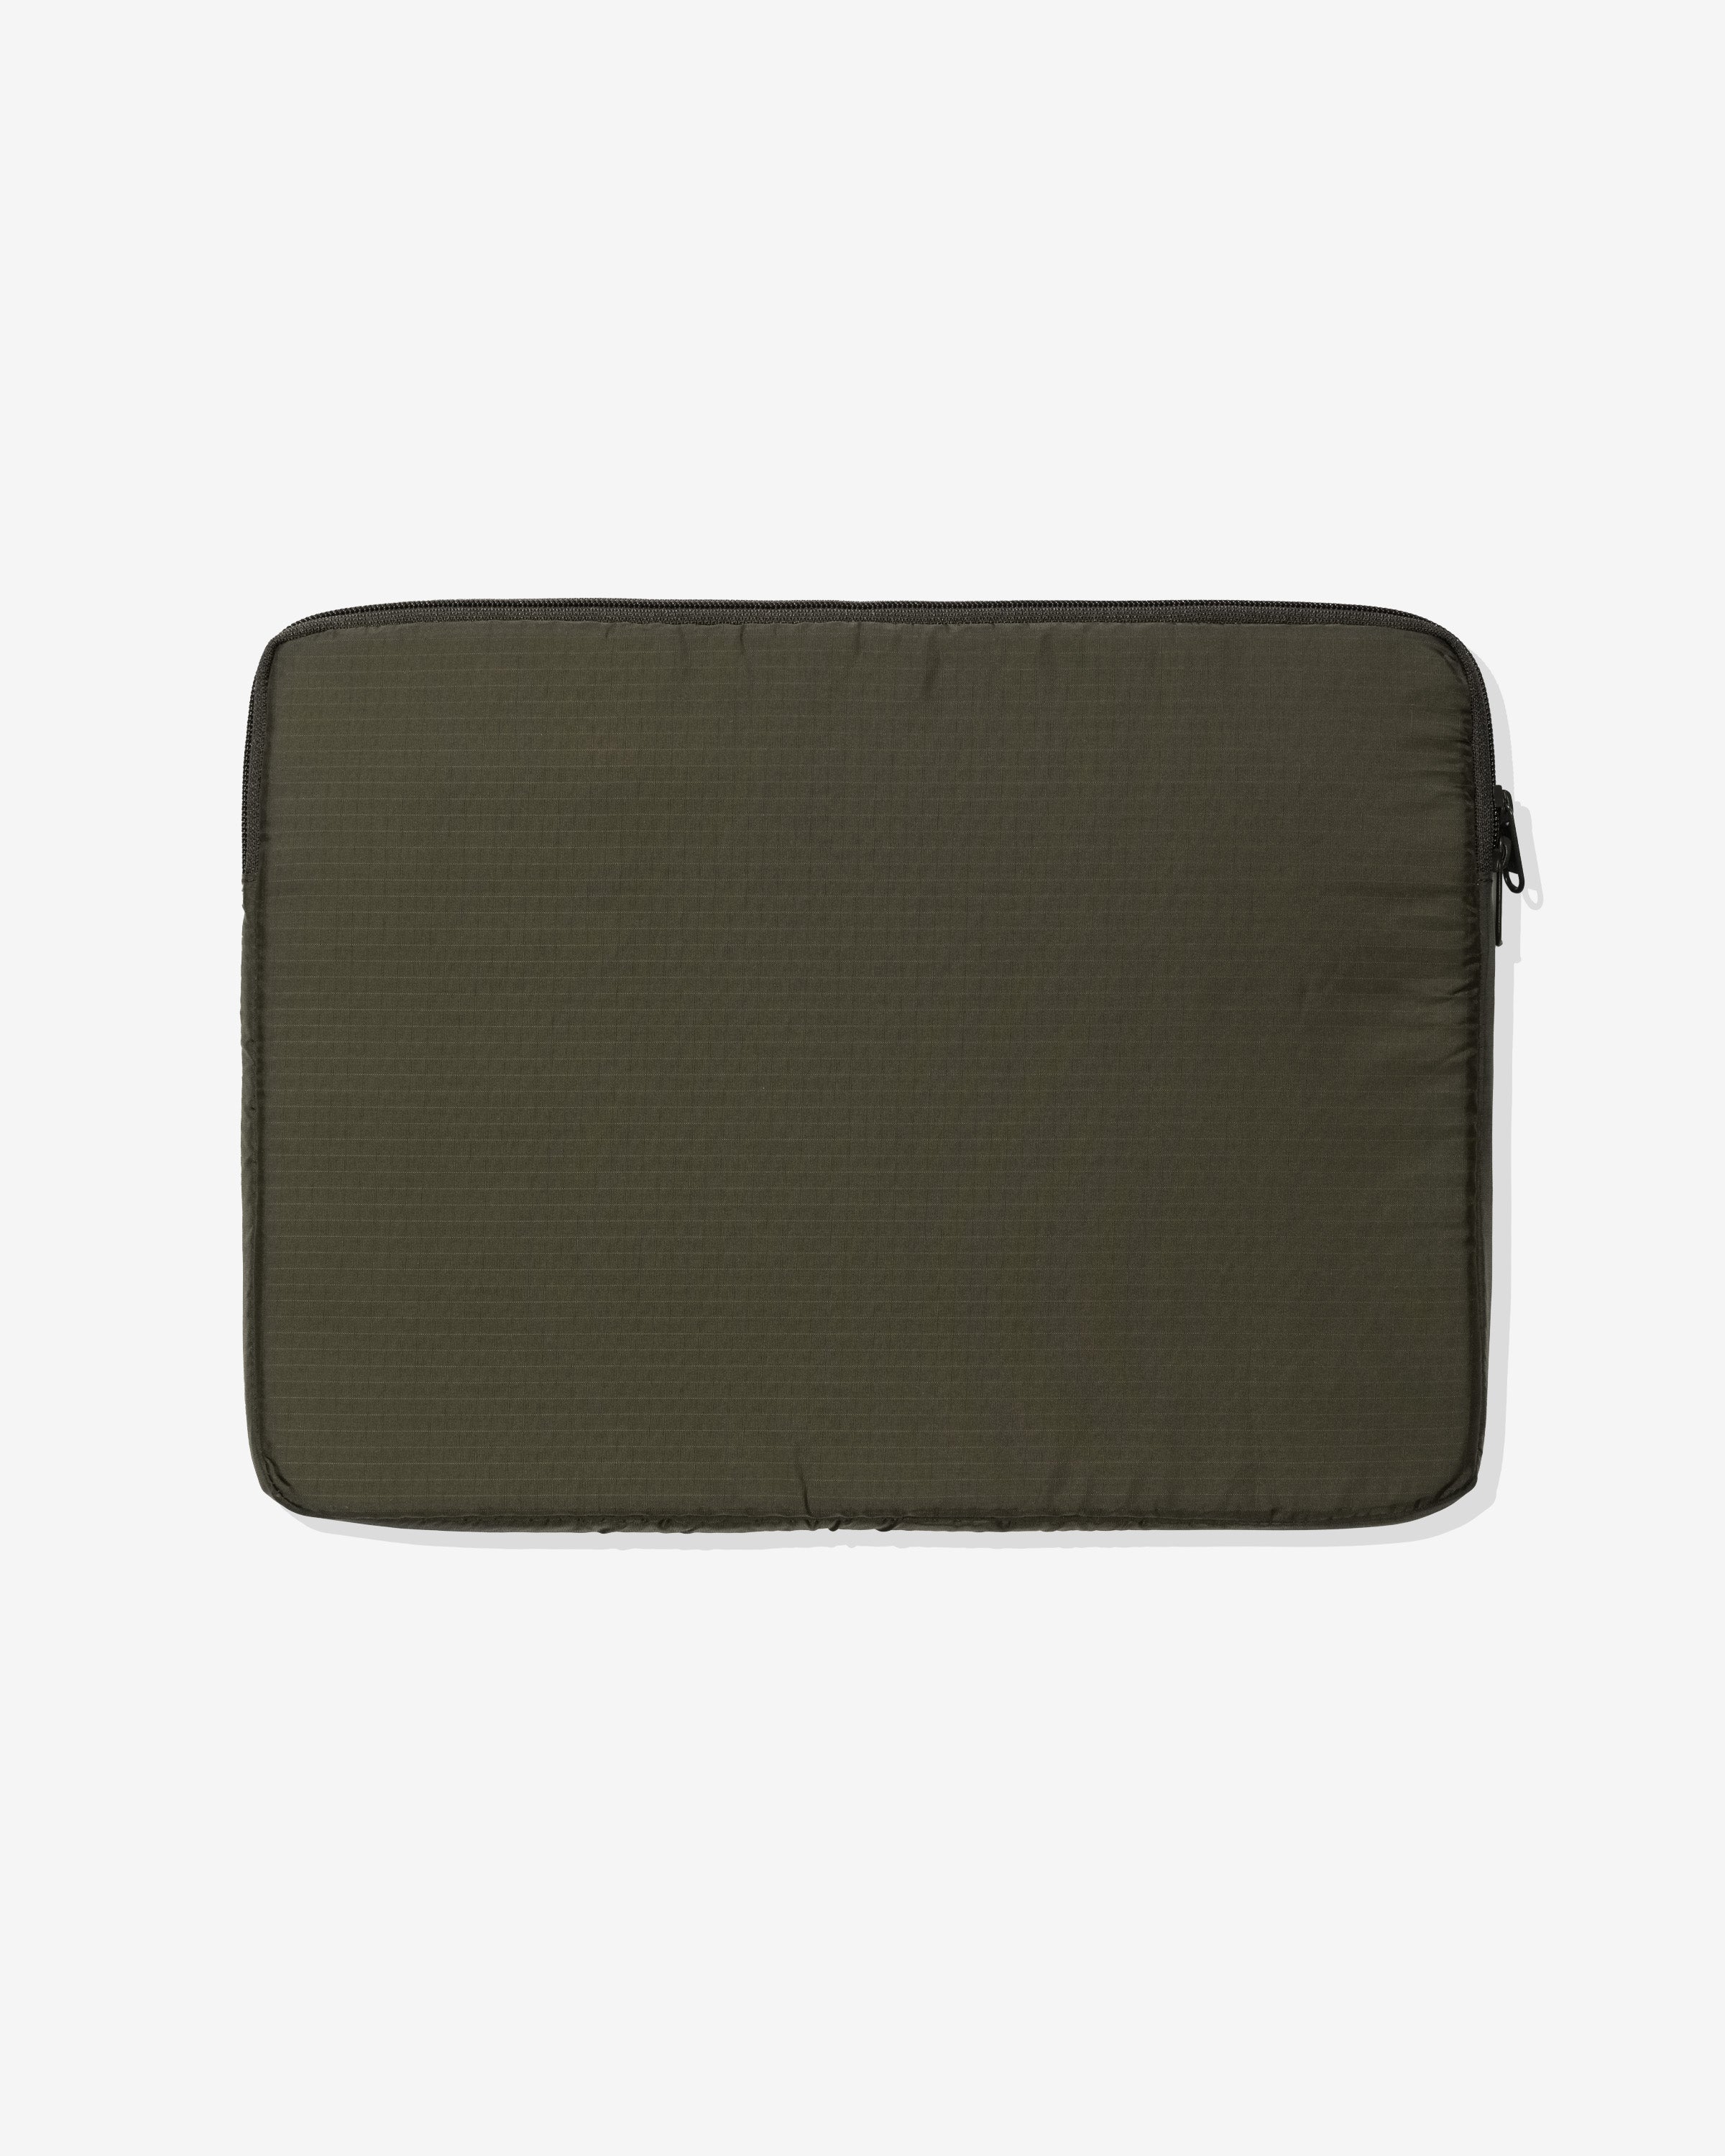 UNDEFEATED RIPSTOP LAPTOP SLEEVE - OLIVE